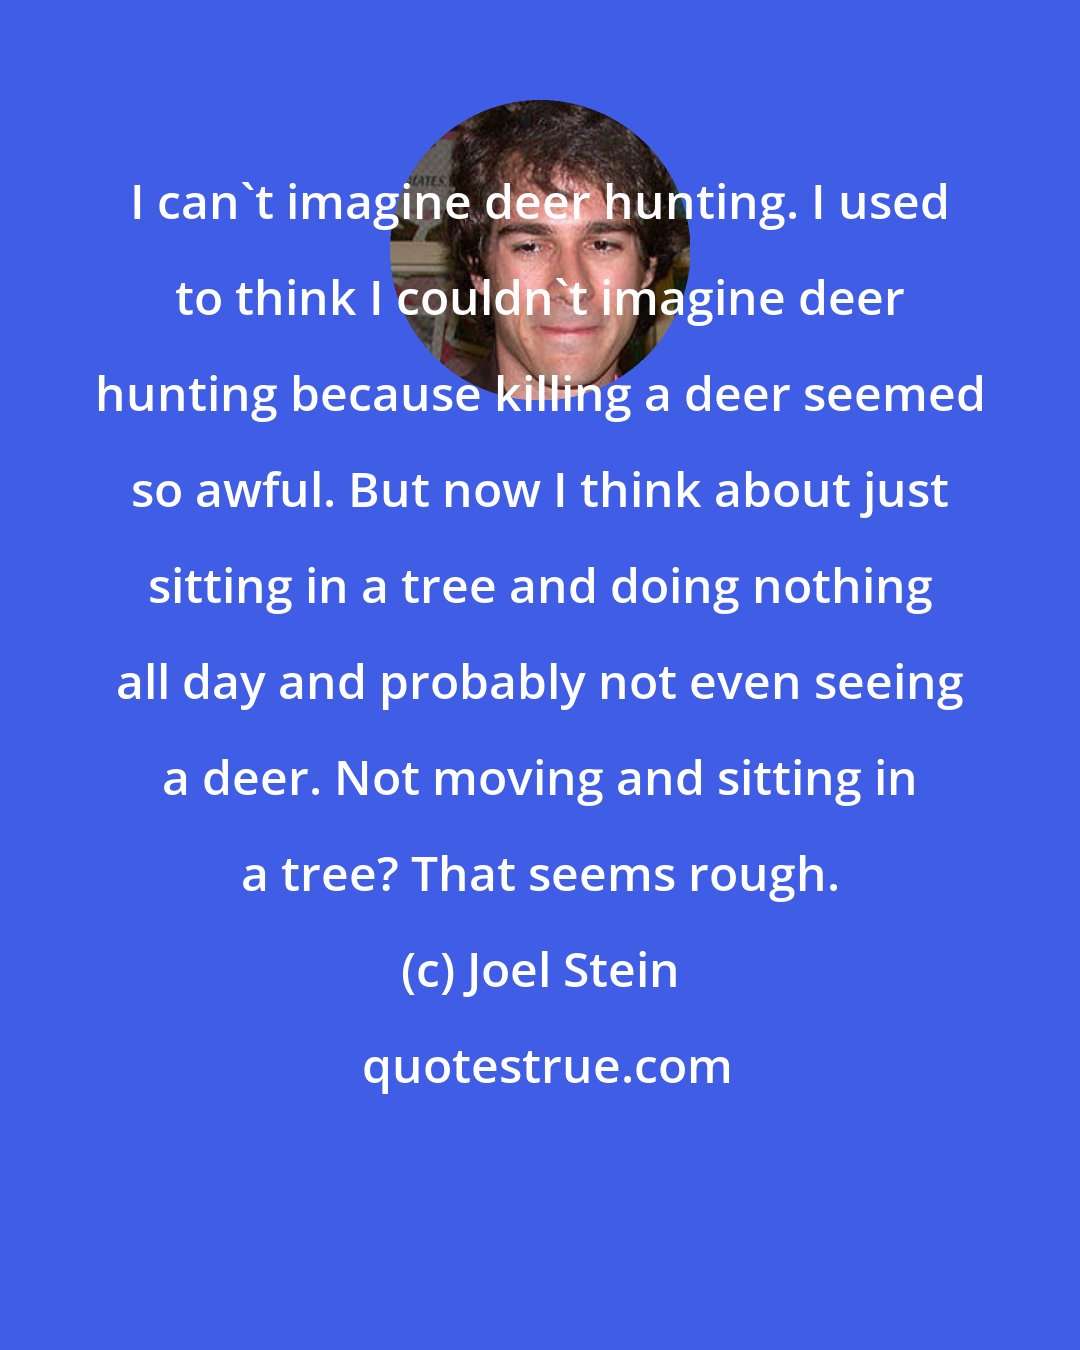 Joel Stein: I can't imagine deer hunting. I used to think I couldn't imagine deer hunting because killing a deer seemed so awful. But now I think about just sitting in a tree and doing nothing all day and probably not even seeing a deer. Not moving and sitting in a tree? That seems rough.